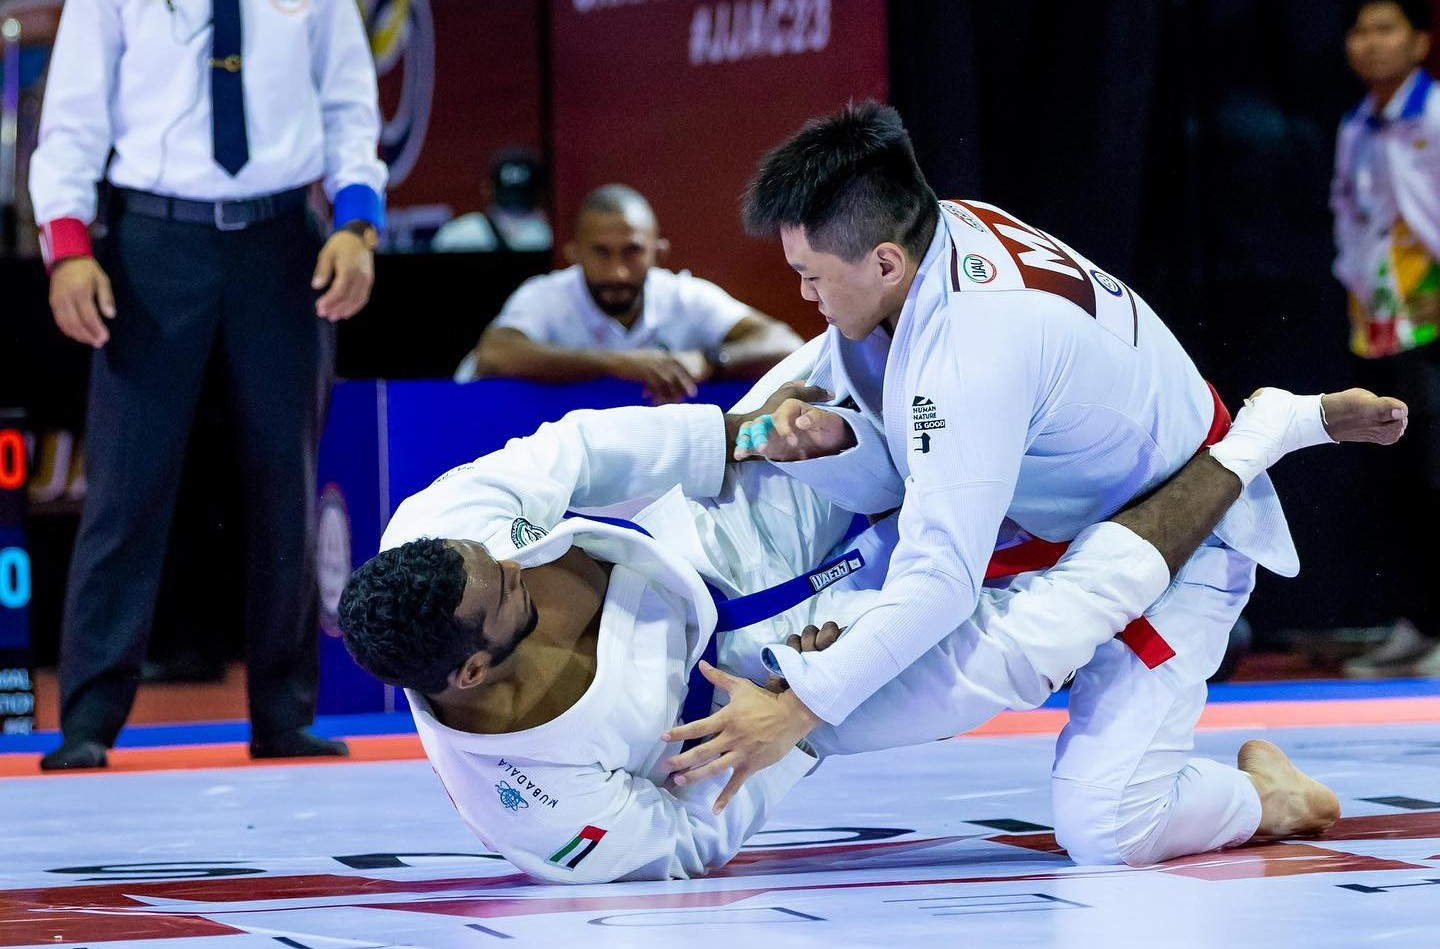 The UAE won four gold medals on the penultimate day of the Ju-Jitsu Asian Championships ©JJAU